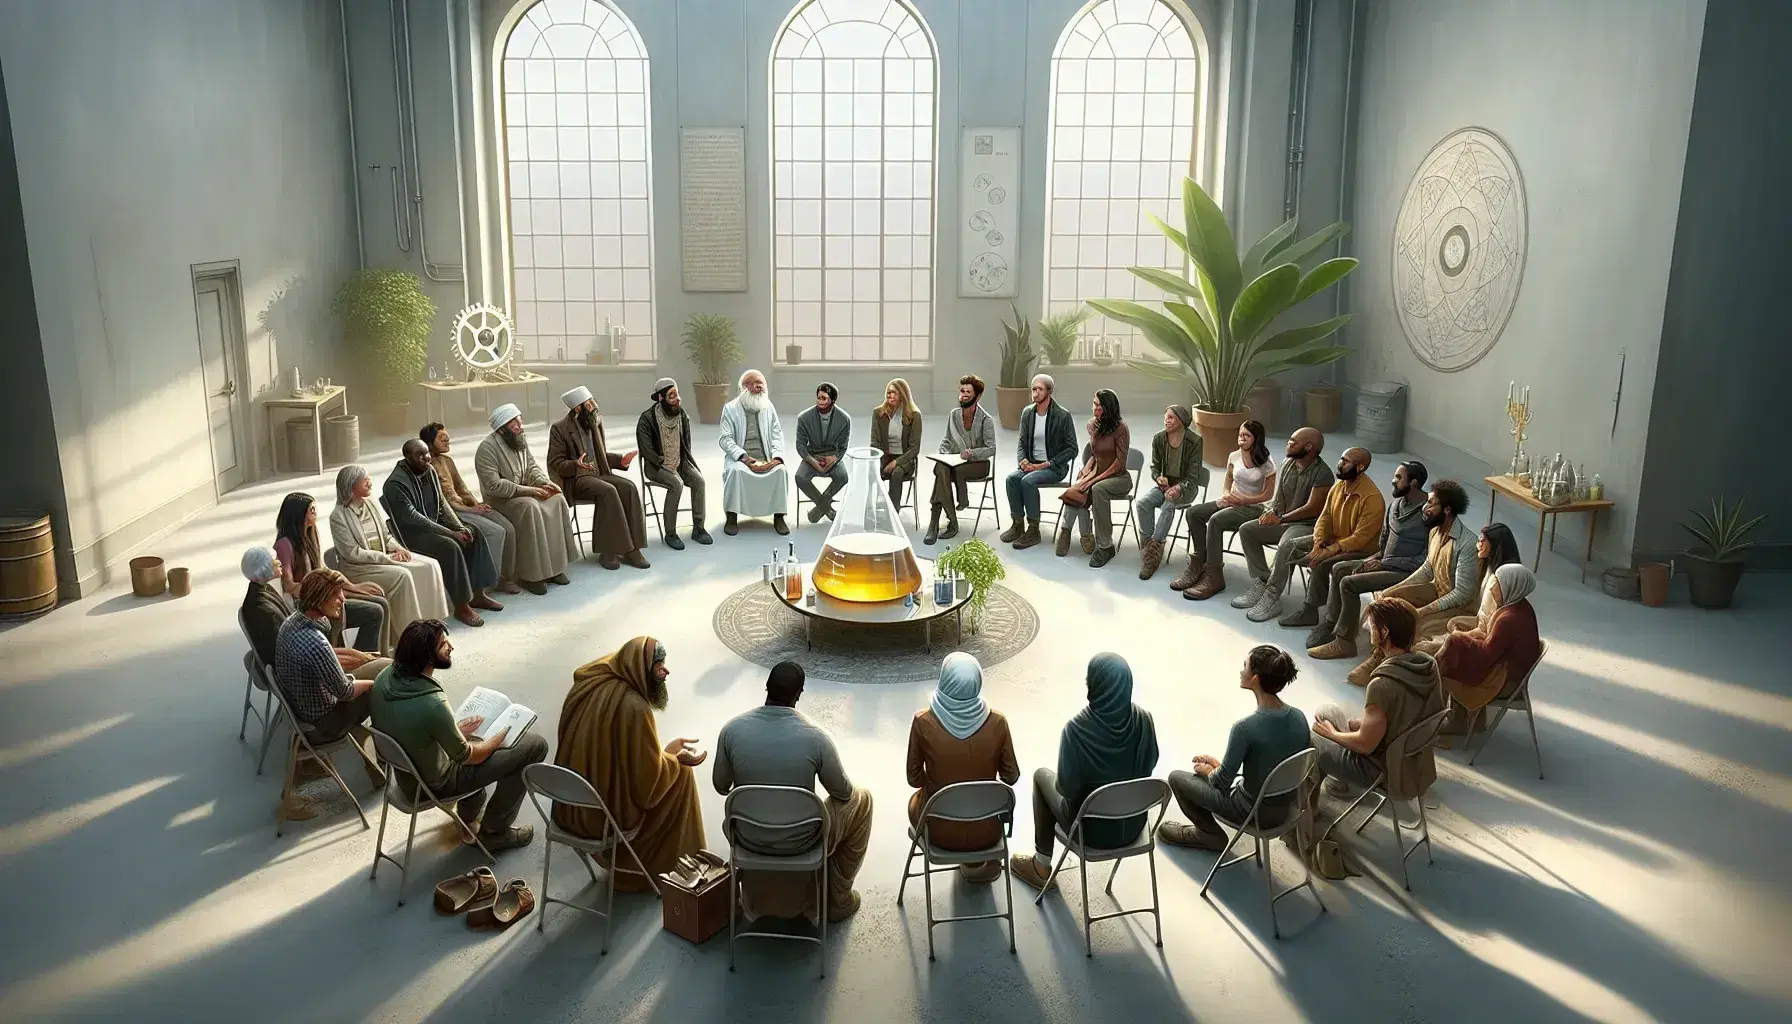 Multi-ethnic group sitting in a circle in a bright room with a central table with beaker, plant, open book and gear.